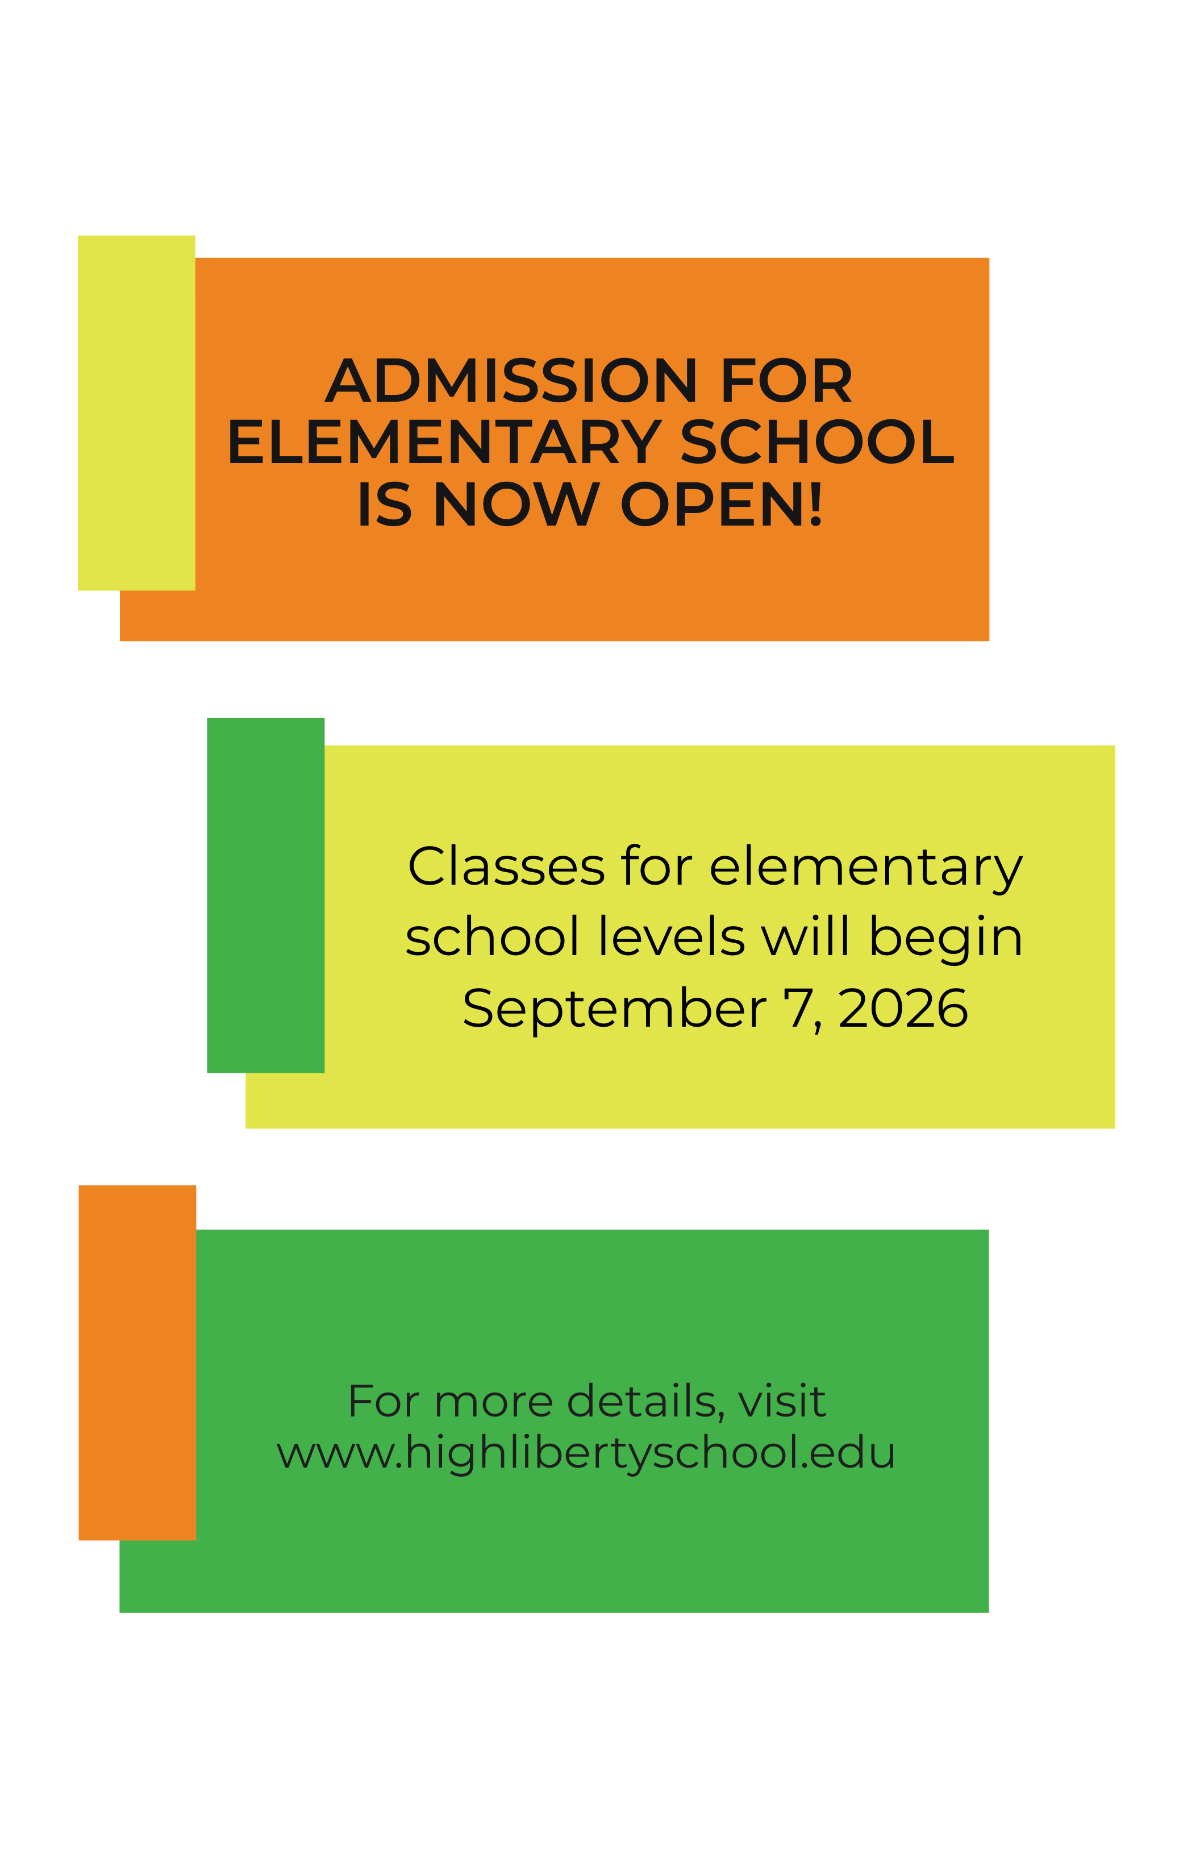 Elementary School Admission Poster Template